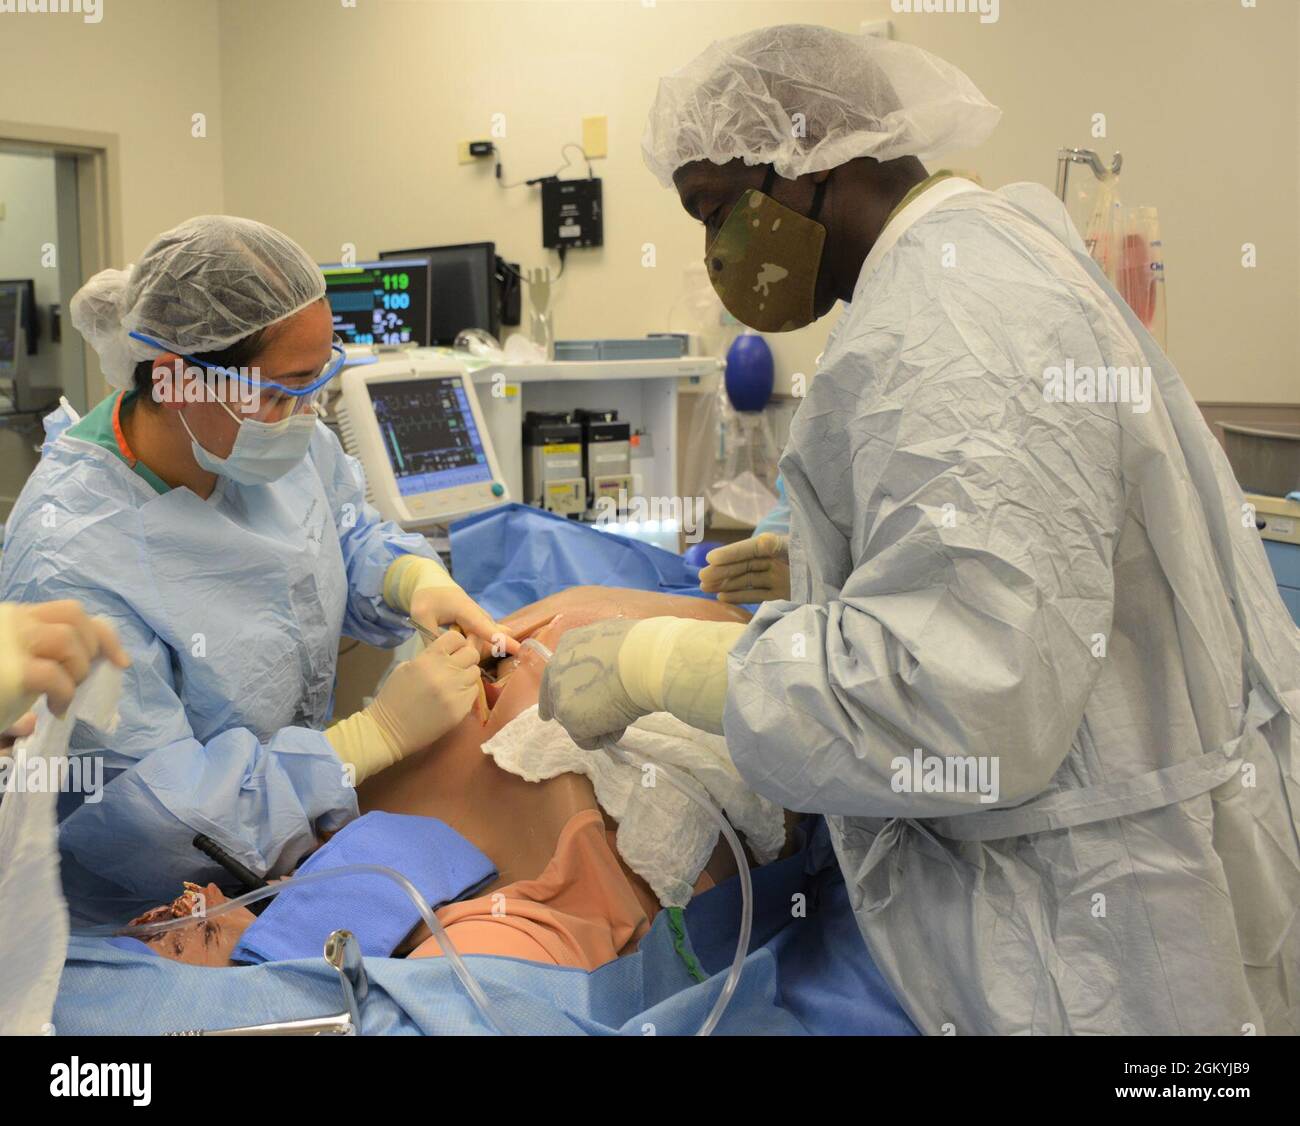 Lt. Gen. Scott Dingle assists General Surgery Chief Resident Maj. (Dr.) Kelli Tavares during a simulated emergent exploratory laparotomy.    Tripler Medical Simulation Center holds three major accreditations which includes the Society of Simulation in Healthcare (SSH), top tier Comprehensive American College of Surgeons Accredited Educational Institute (ACS AEI) and the American Society of Anesthesia Maintenance of Certification in Anesthesia (MOCA). Having a top tier accredited simulation center allows TAMC to train the full spectrum of a ready medical force by providing direct support to res Stock Photo